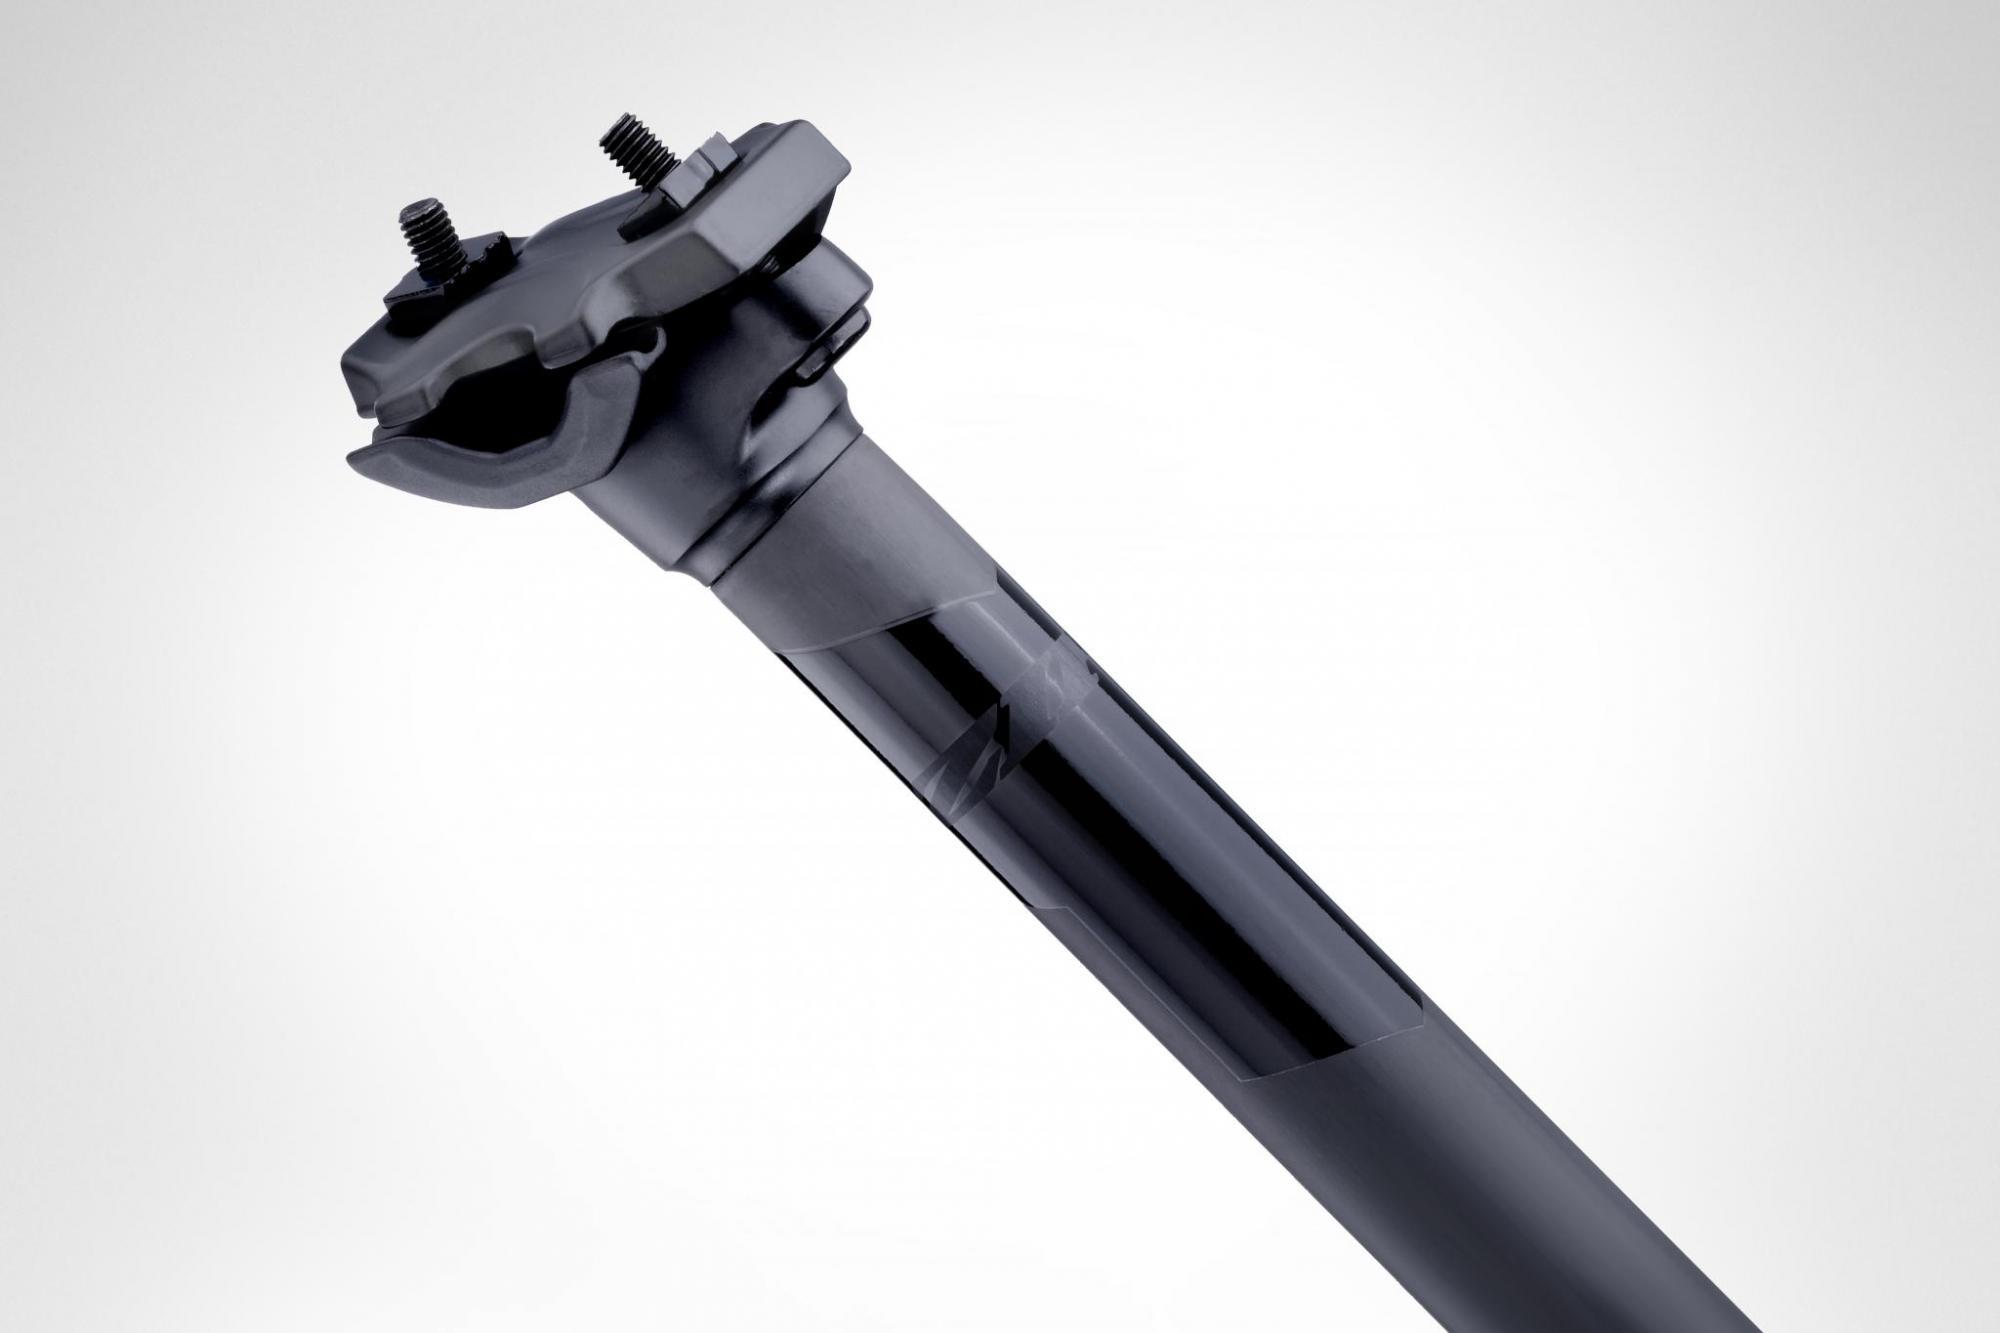 Revised Zipp Service Course SL seatpost shakes off vibrations + updated dropbars